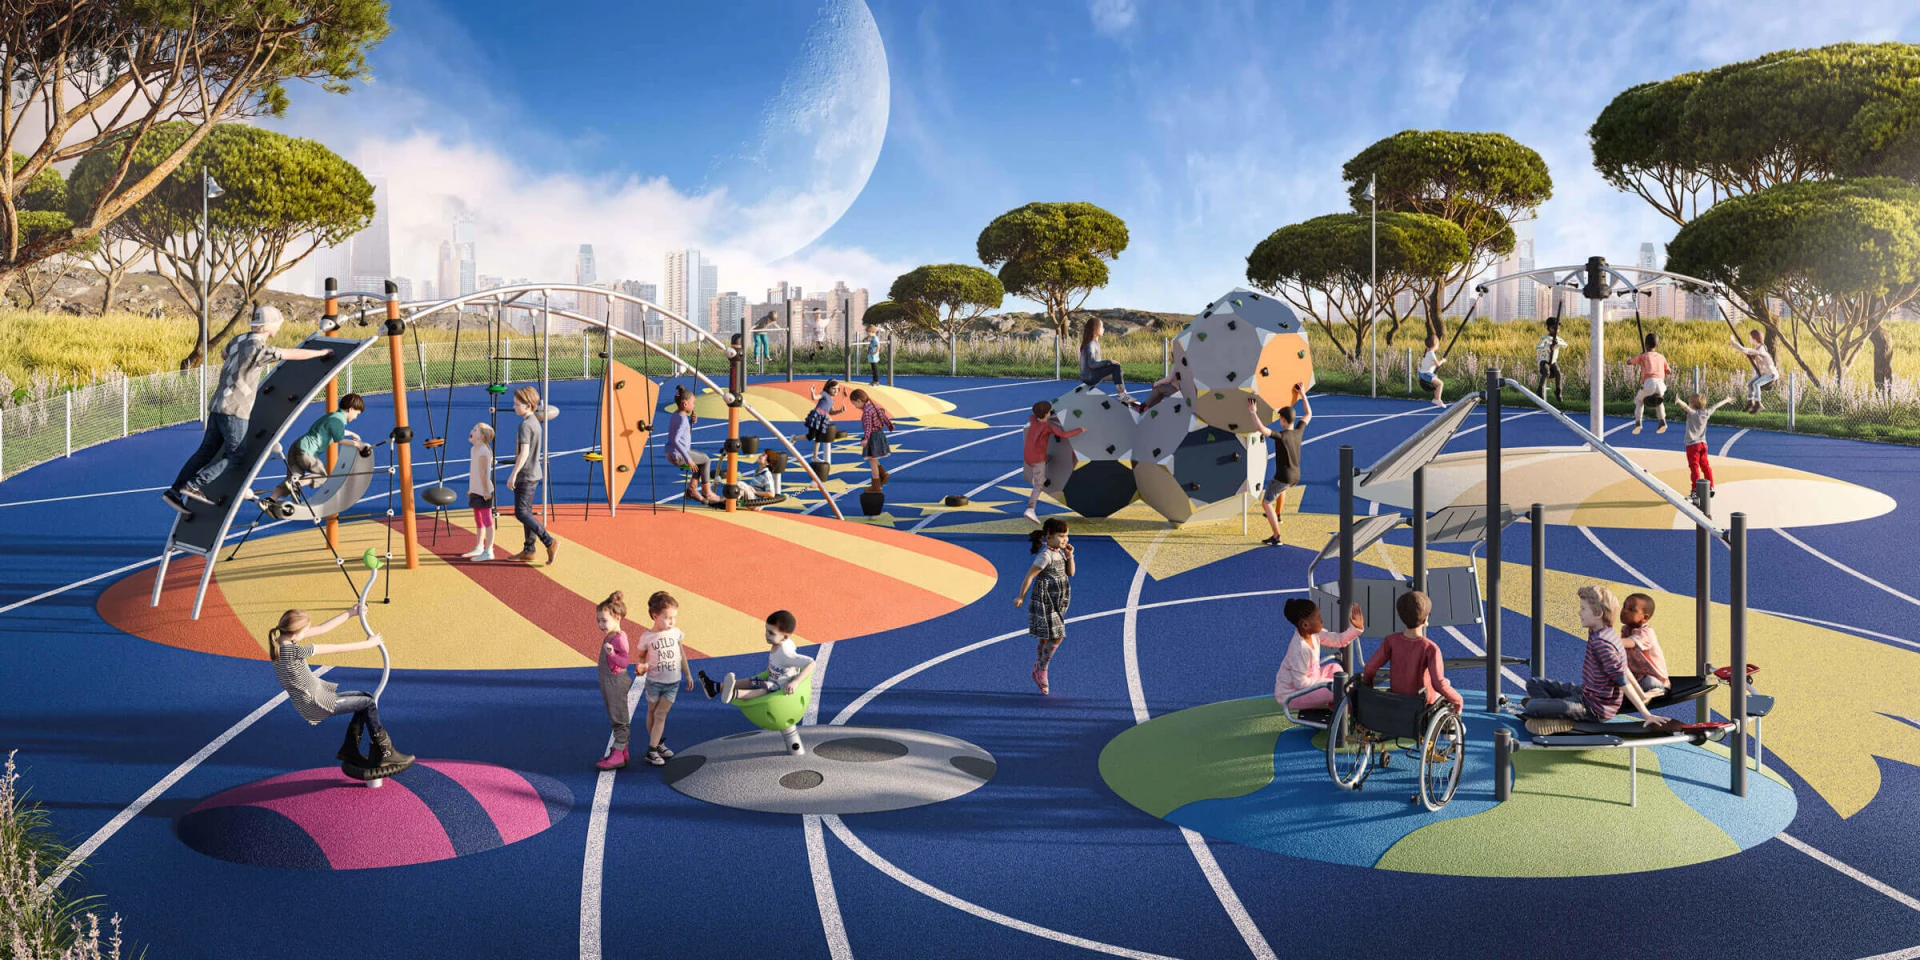 Conceptual playground idea of a space themed playground